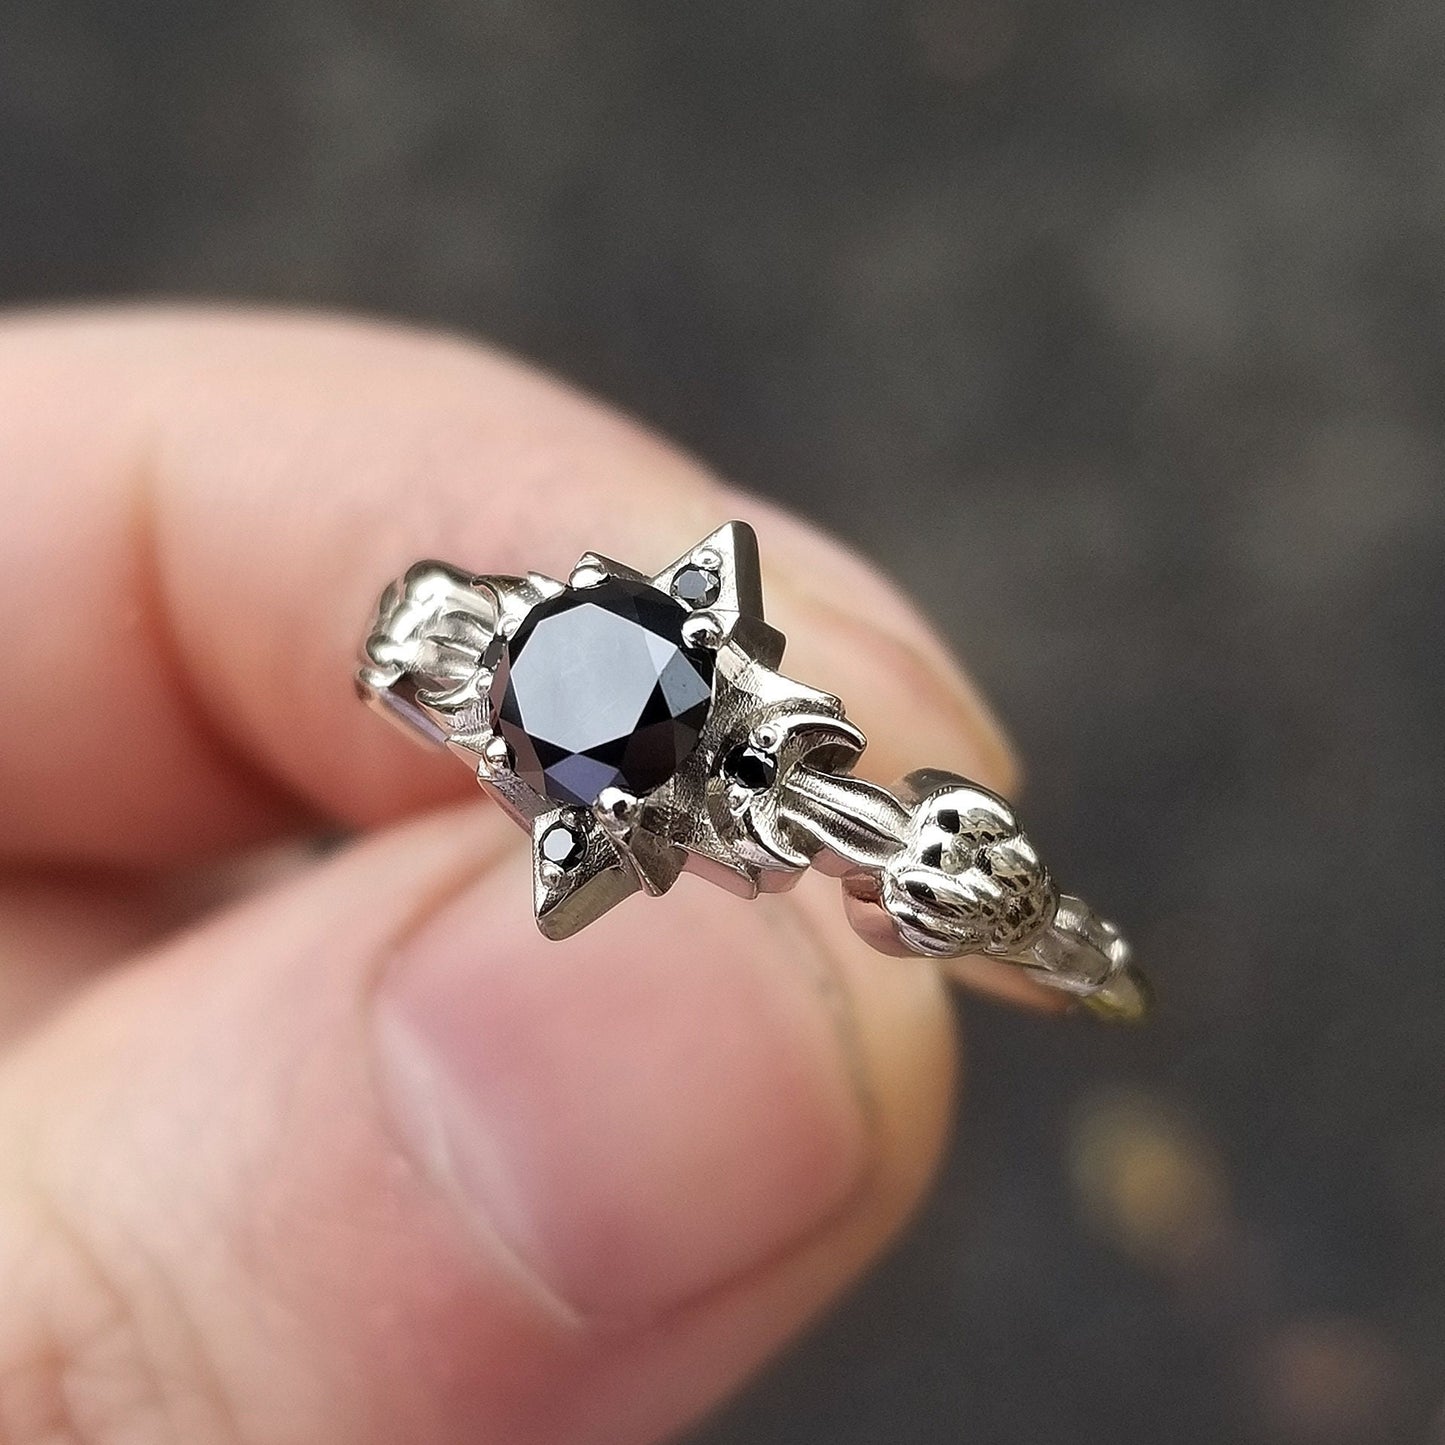 Celestial Black Diamond Engagement Ring - Moon, Star and Clouds - 14k Palladium White Gold Gothic Fine Jewelry